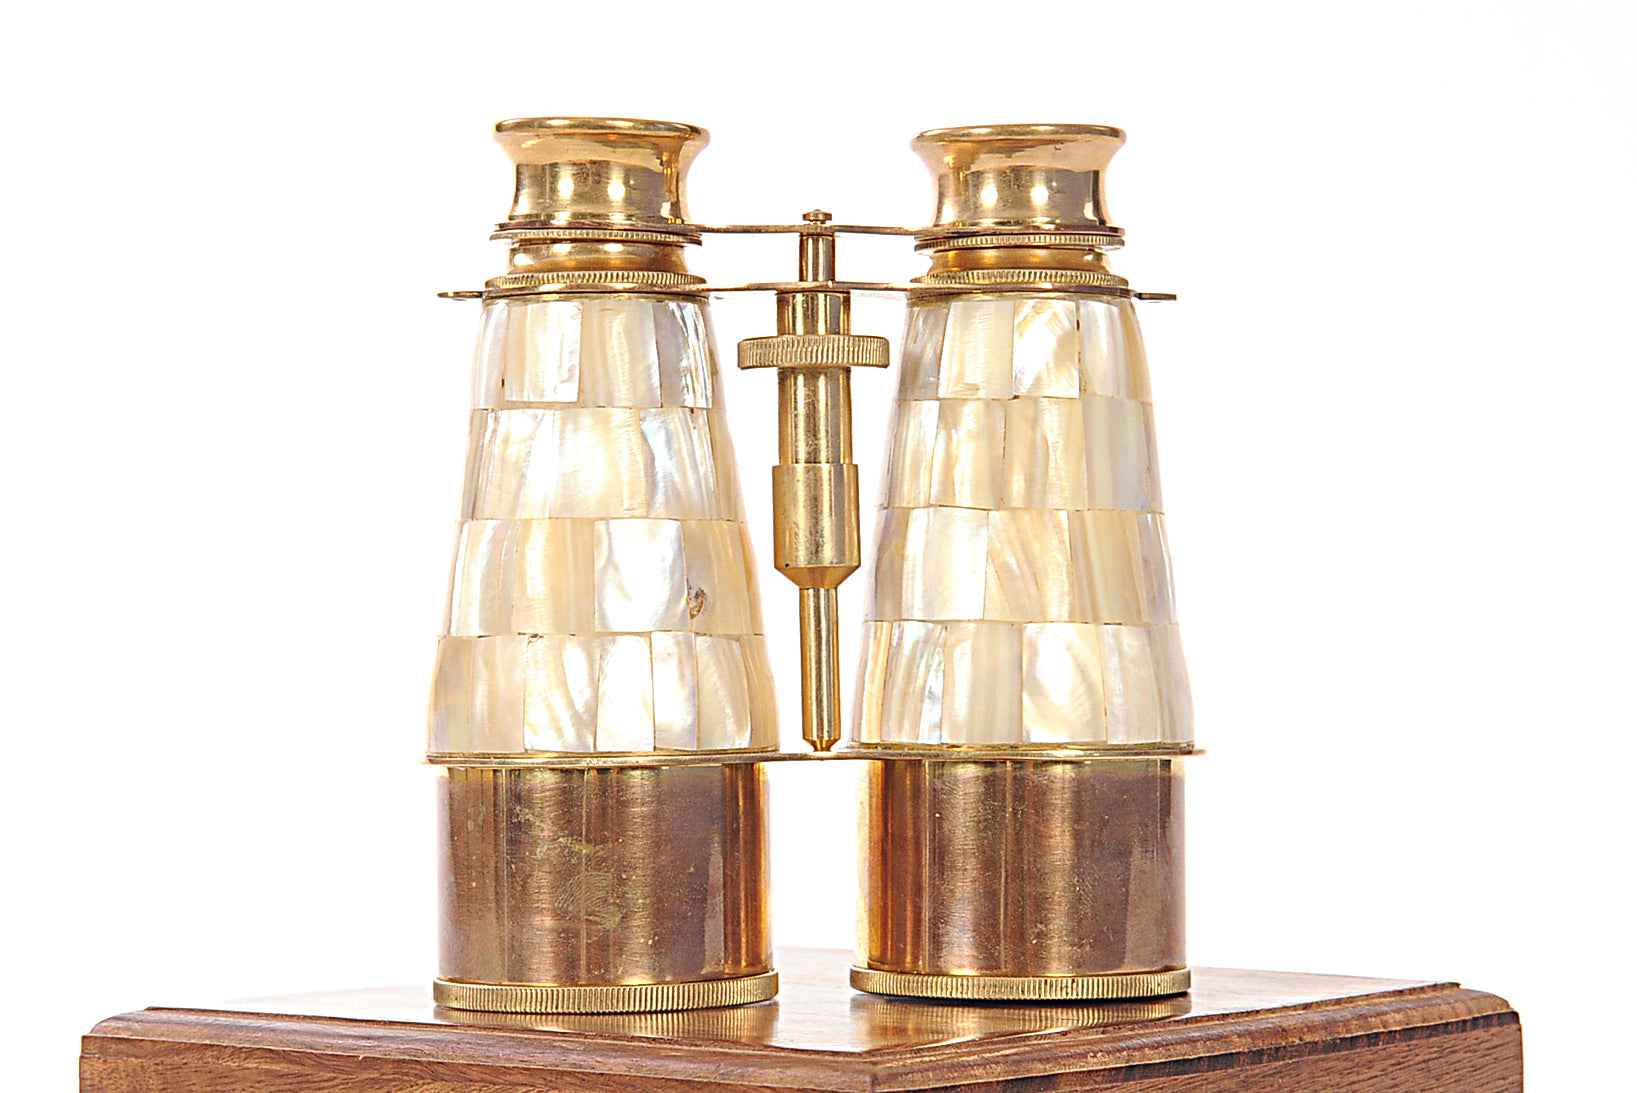 Elegant Brass And Mother Of Pearl Binoculars In Wooden Storage Box